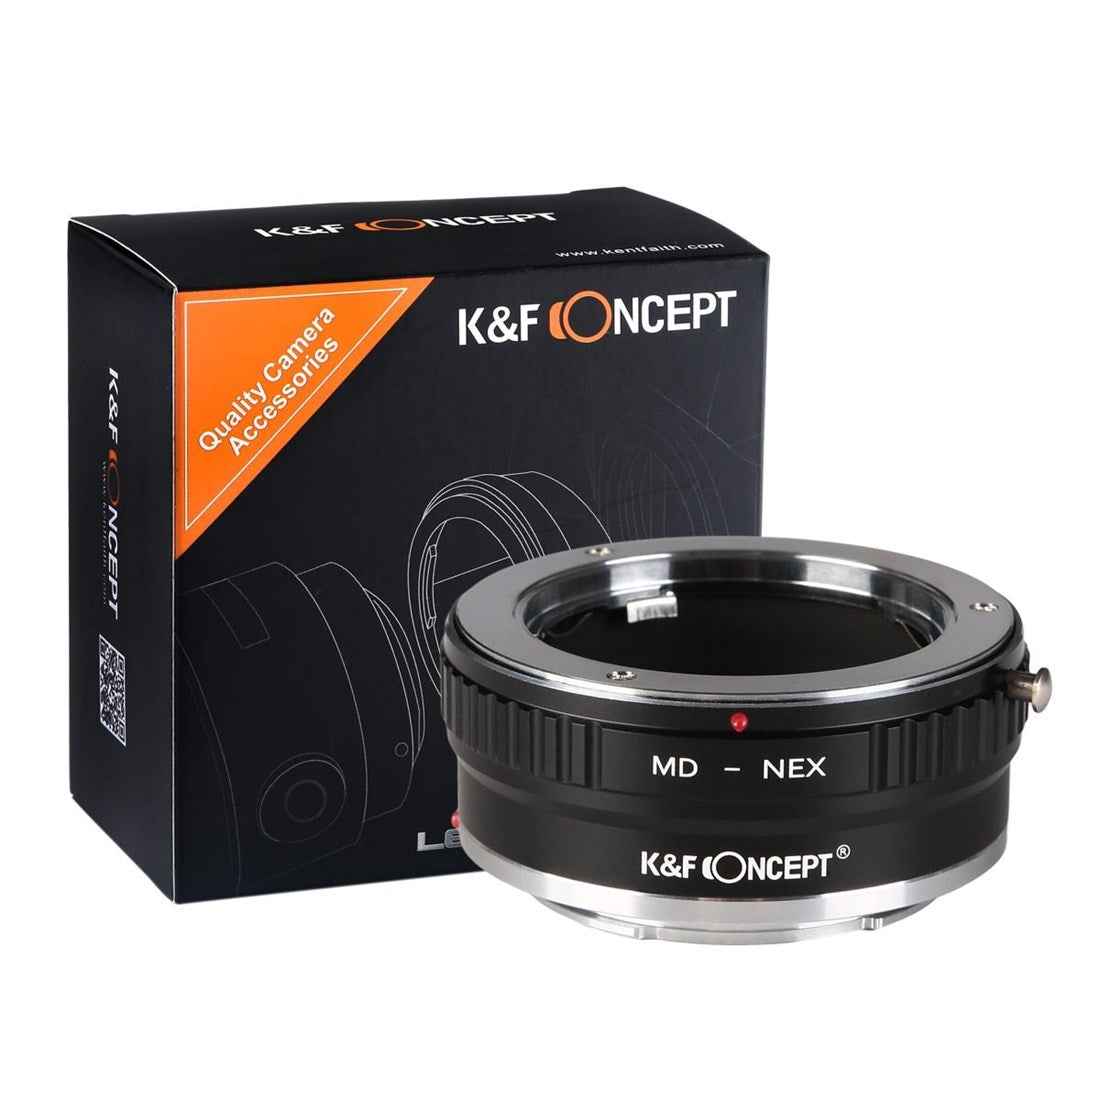 Product Image of K&F Concept Minolta MD Lenses to Sony E Mount Camera Adapter KF06.308